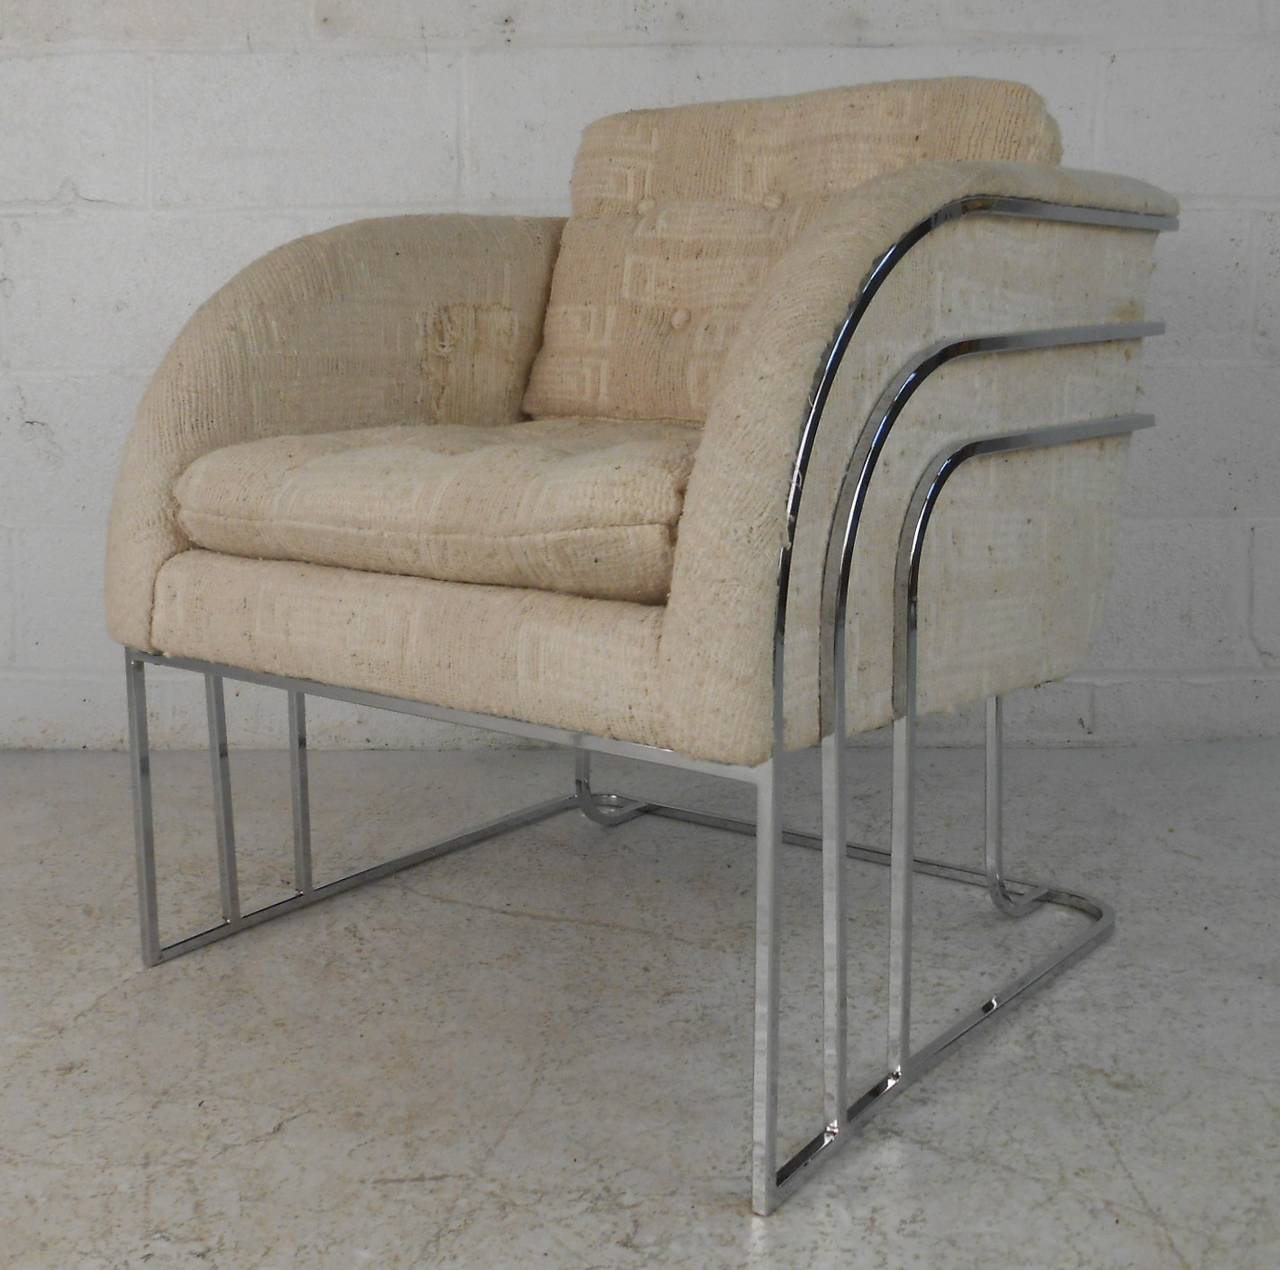 Very stylish Mid-Century Modern curved chrome frame lounge chair by George Mergenov for Weiman/Warren Lloyd. Please confirm item location (NY or NJ) with dealer.